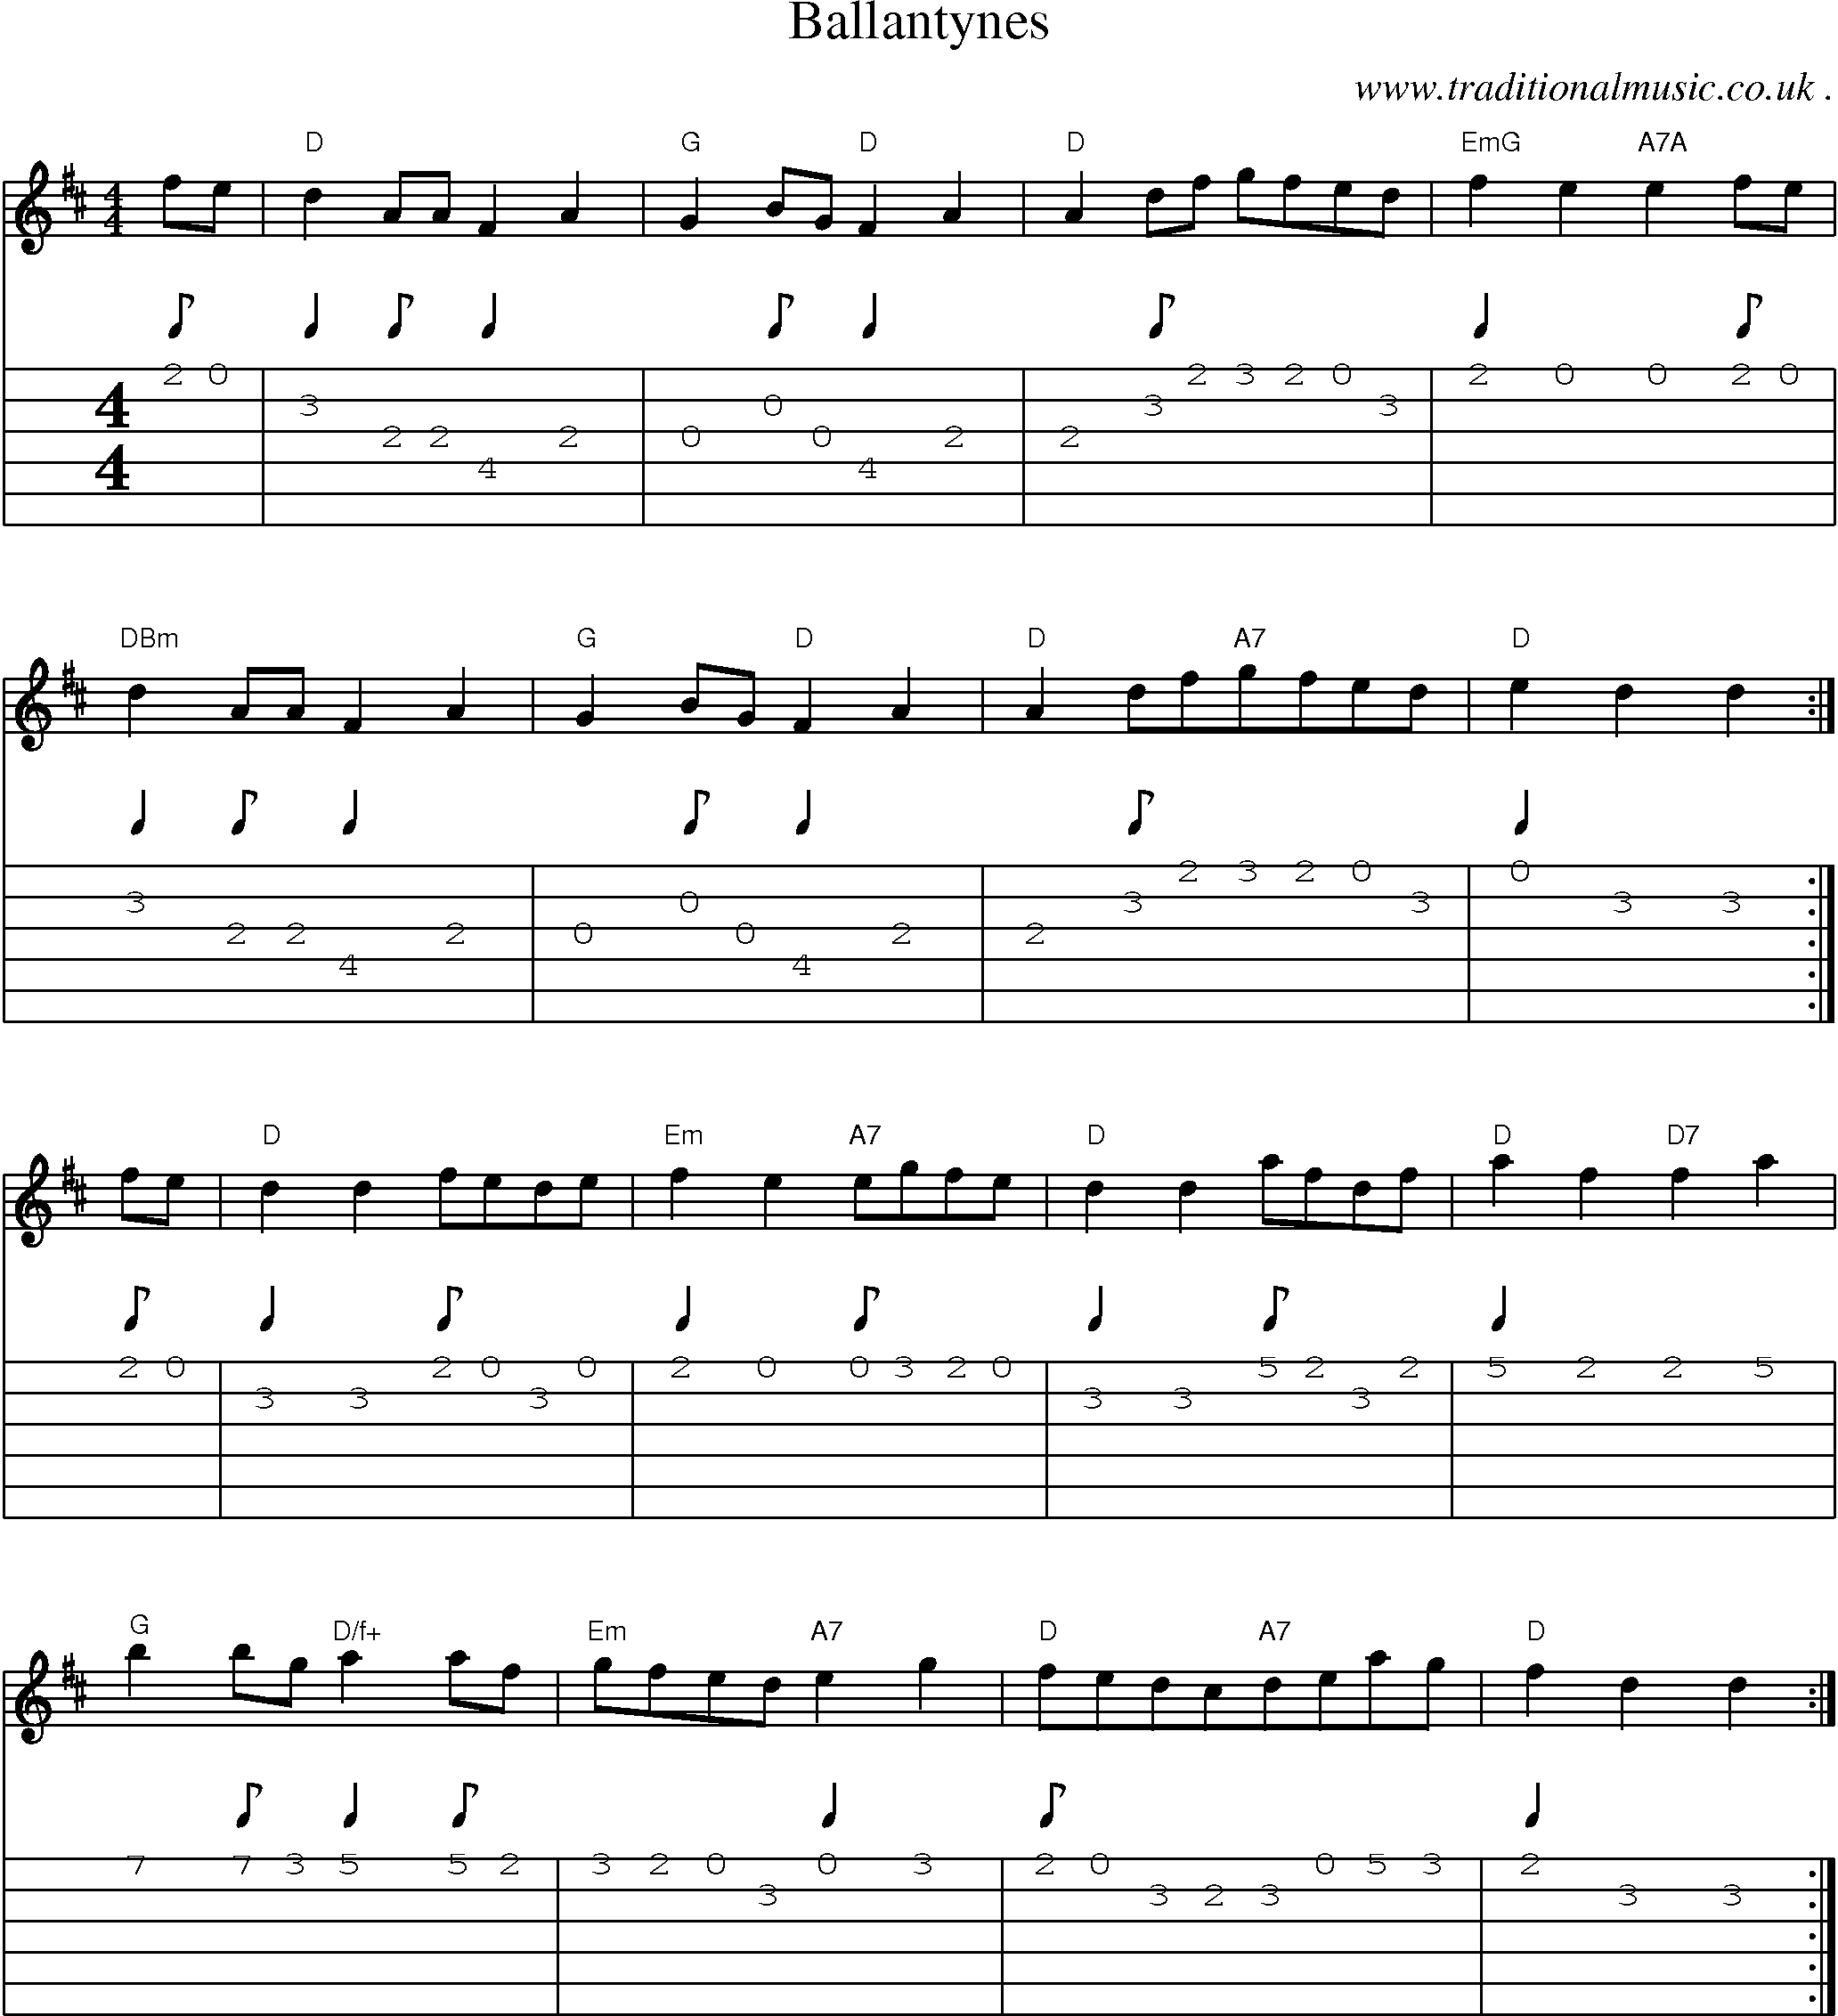 Sheet-Music and Guitar Tabs for Ballantynes